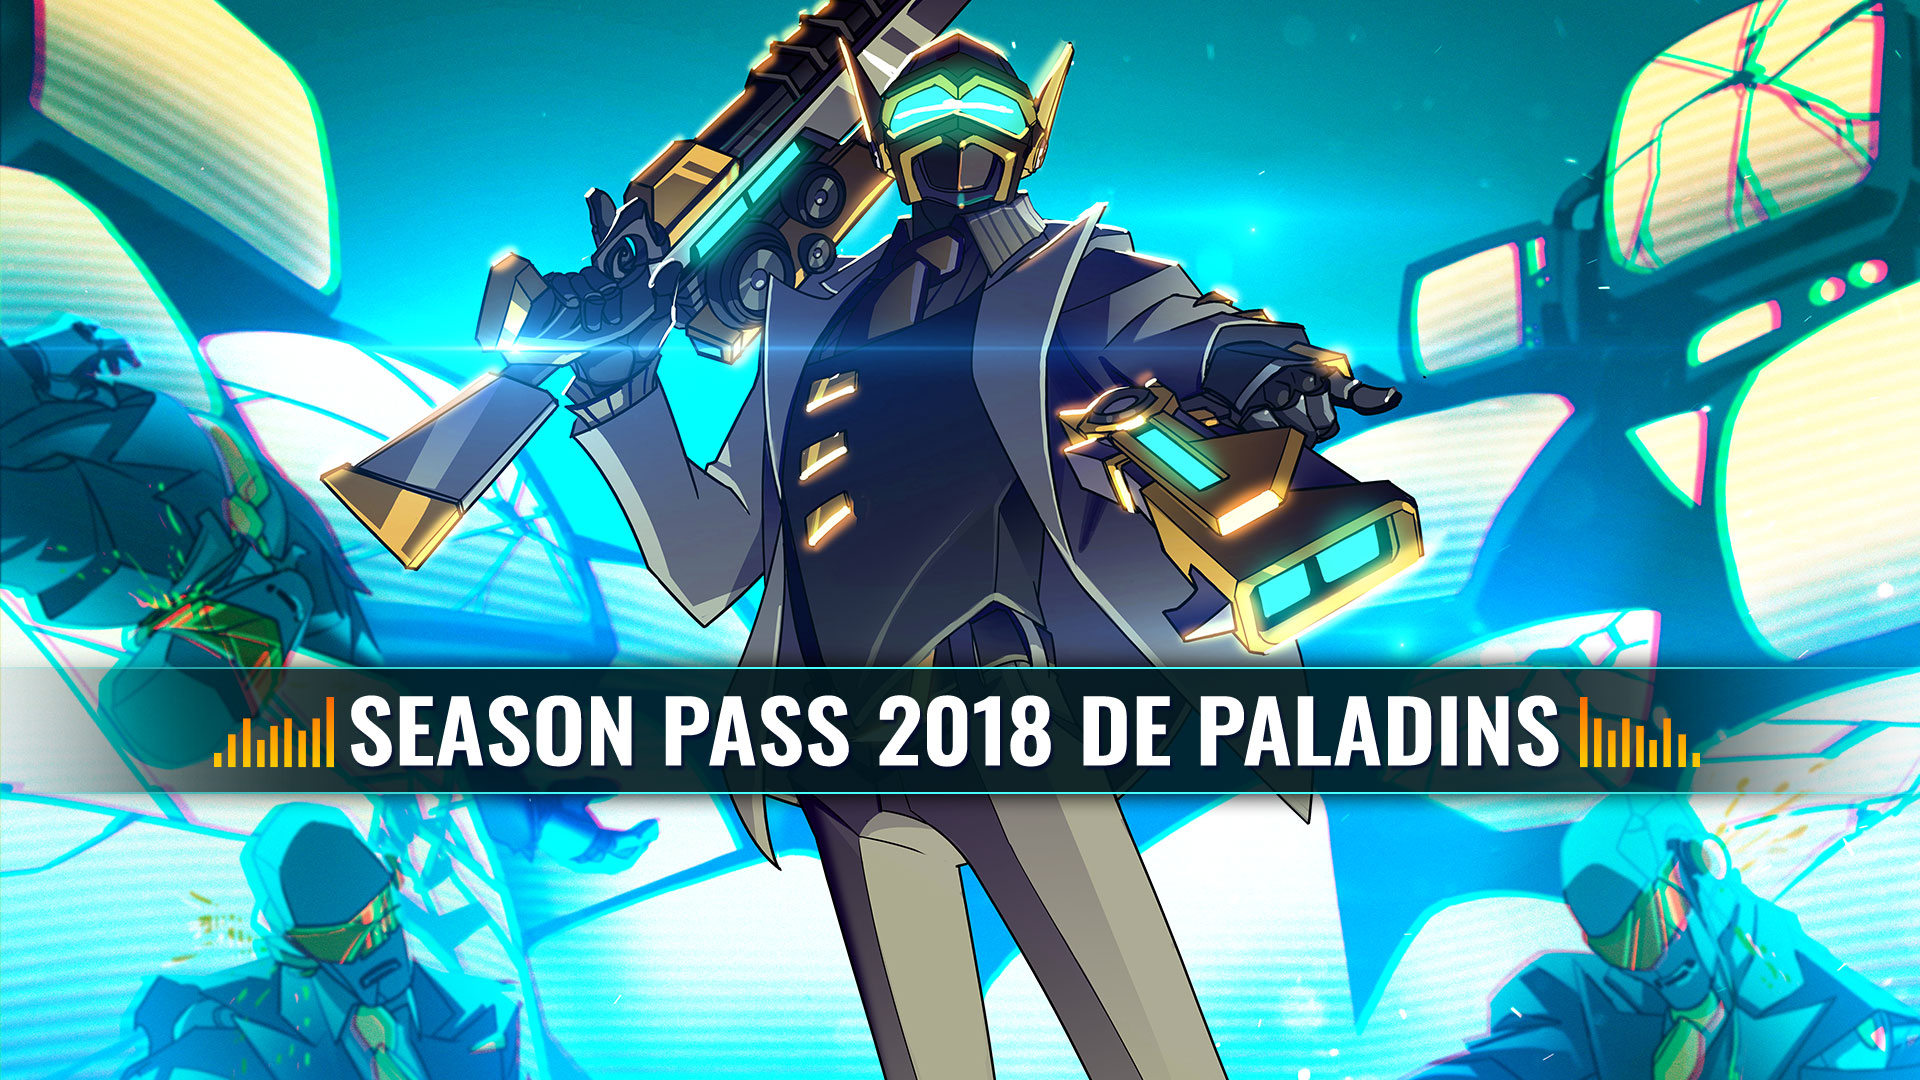 dredge new skin in new battle pass paladins